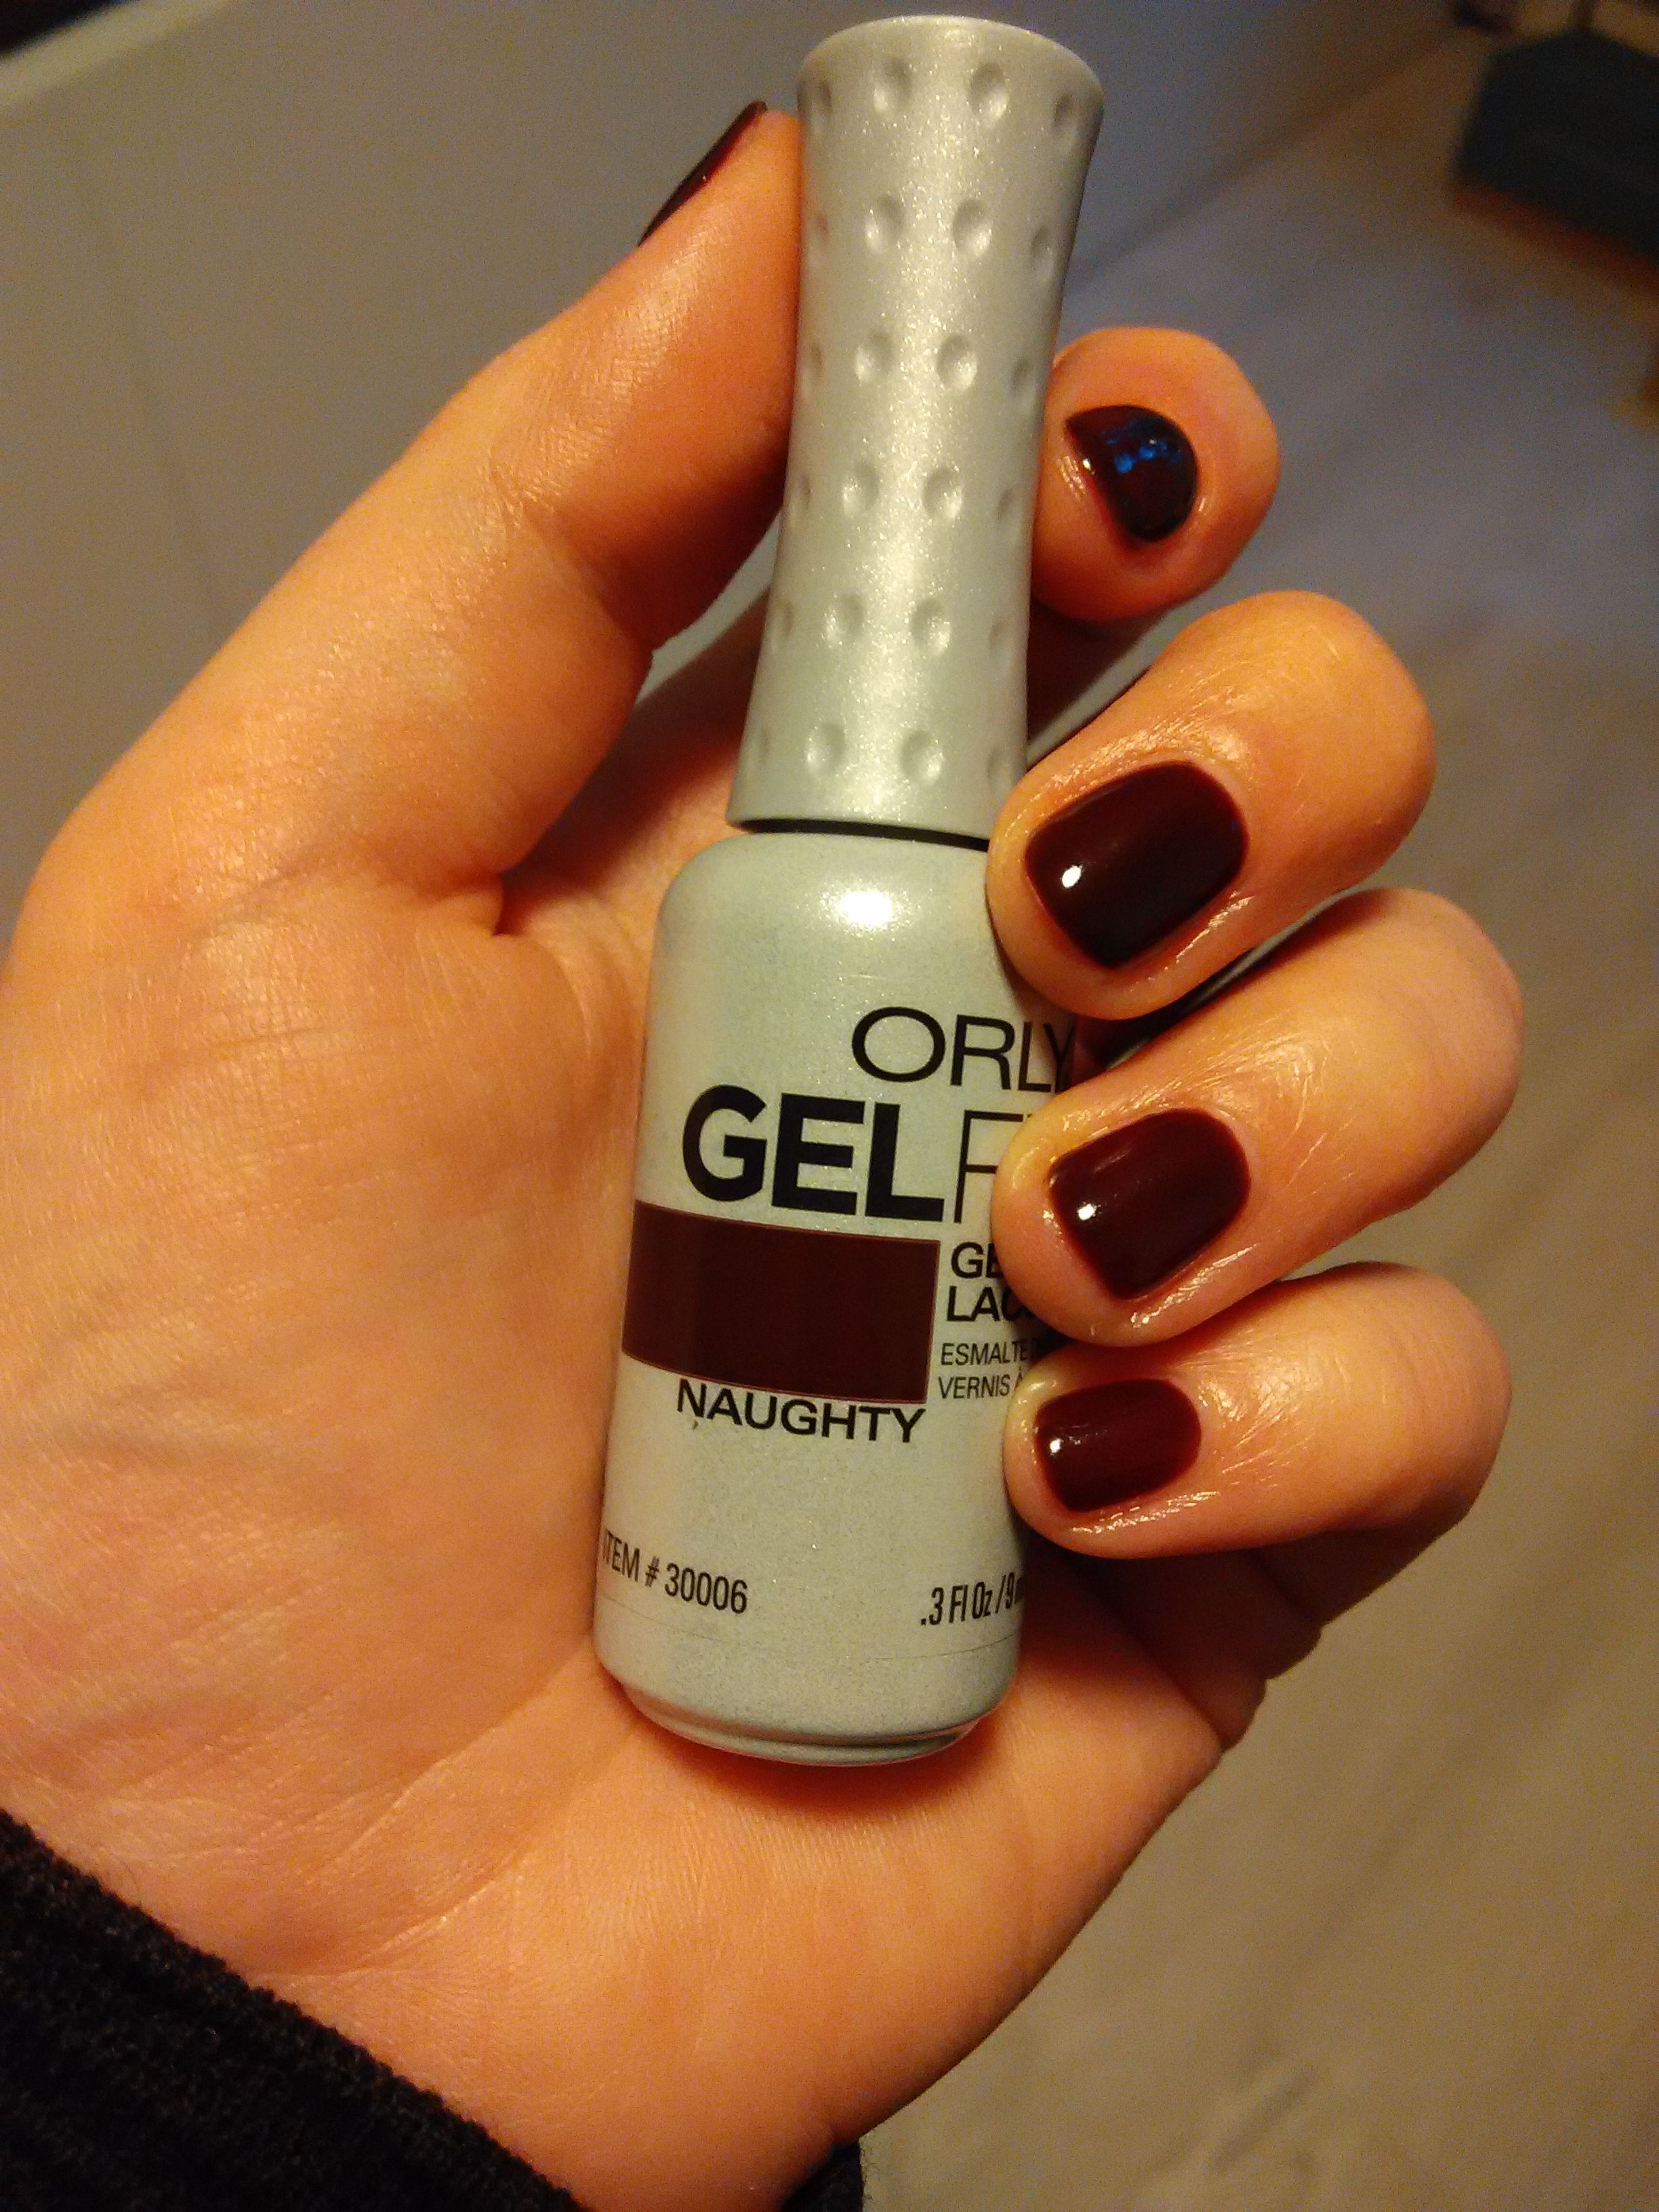 Orly Gelfx Naughty Two Layers Of The Color